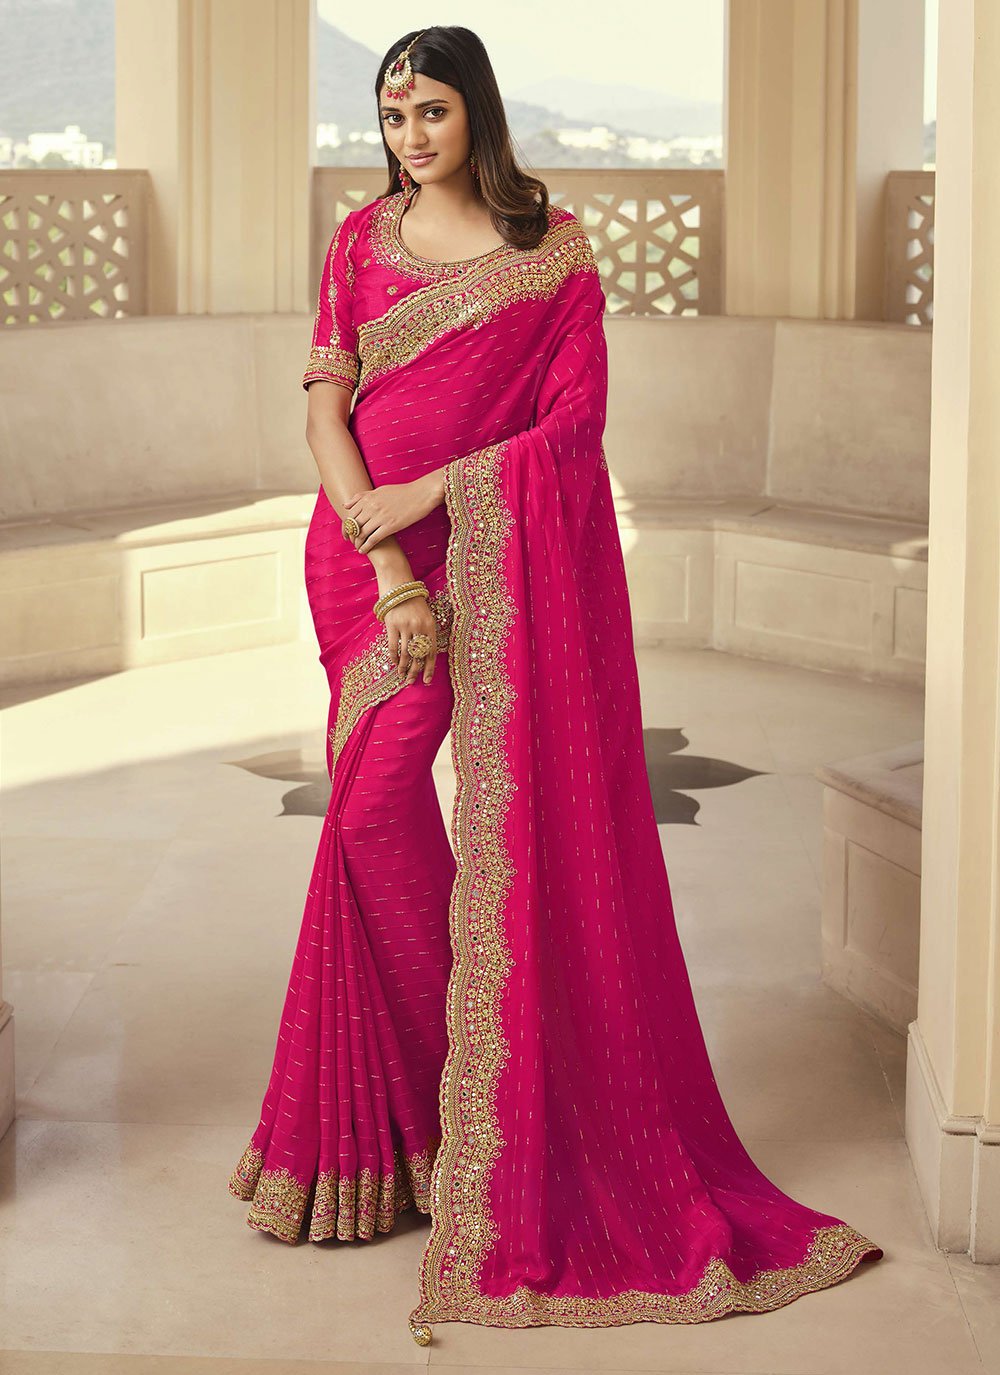 Chic Fancy Sarees And Blouse Ideas You Will Ever See